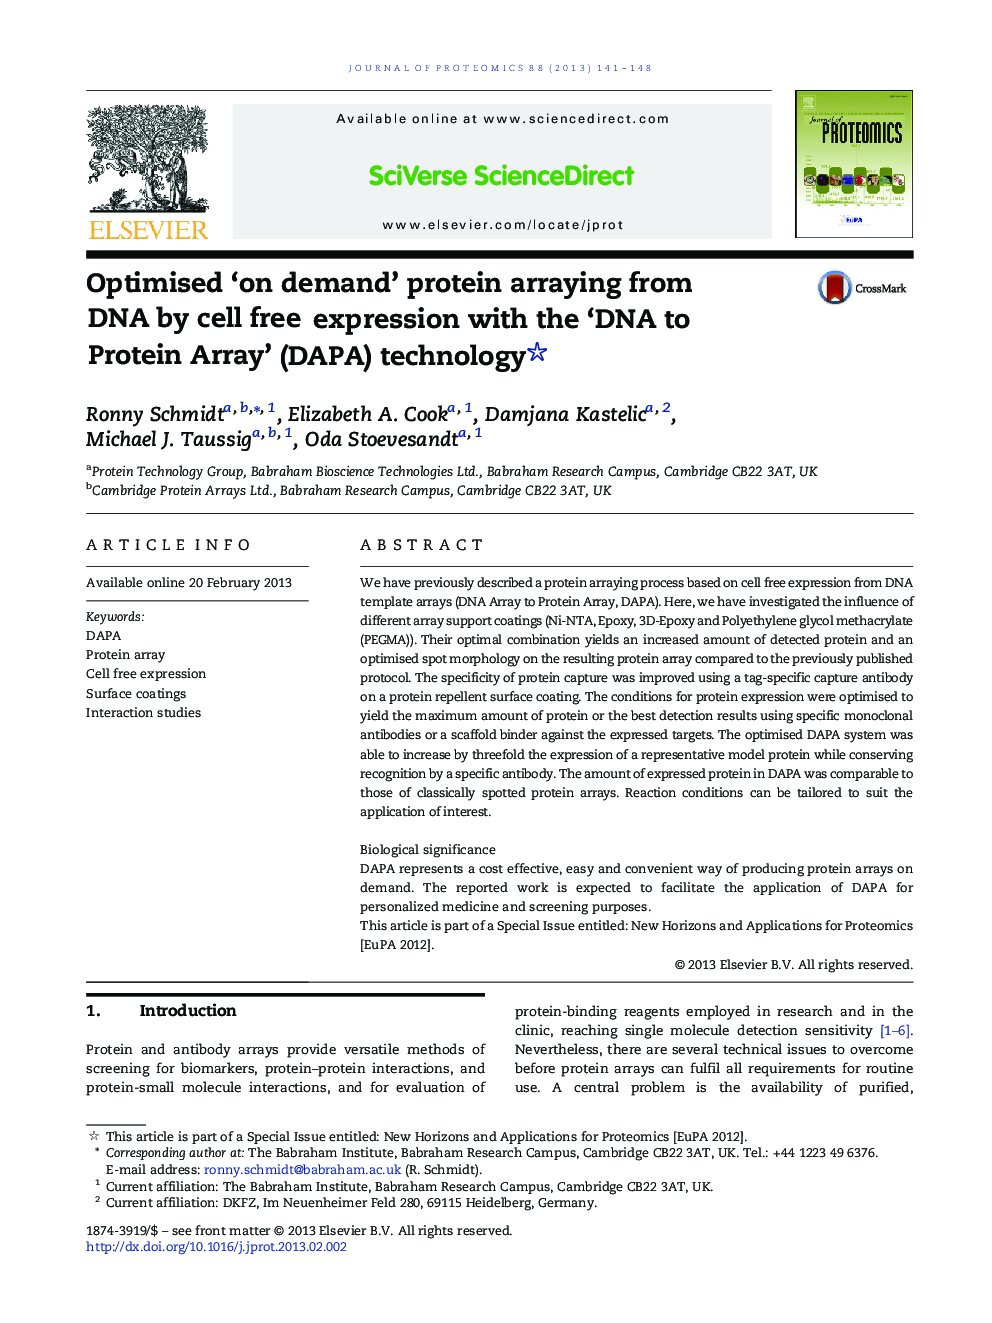 Optimised 'on demand' protein arraying from DNA by cell free expression with the 'DNA to Protein Array' (DAPA) technology